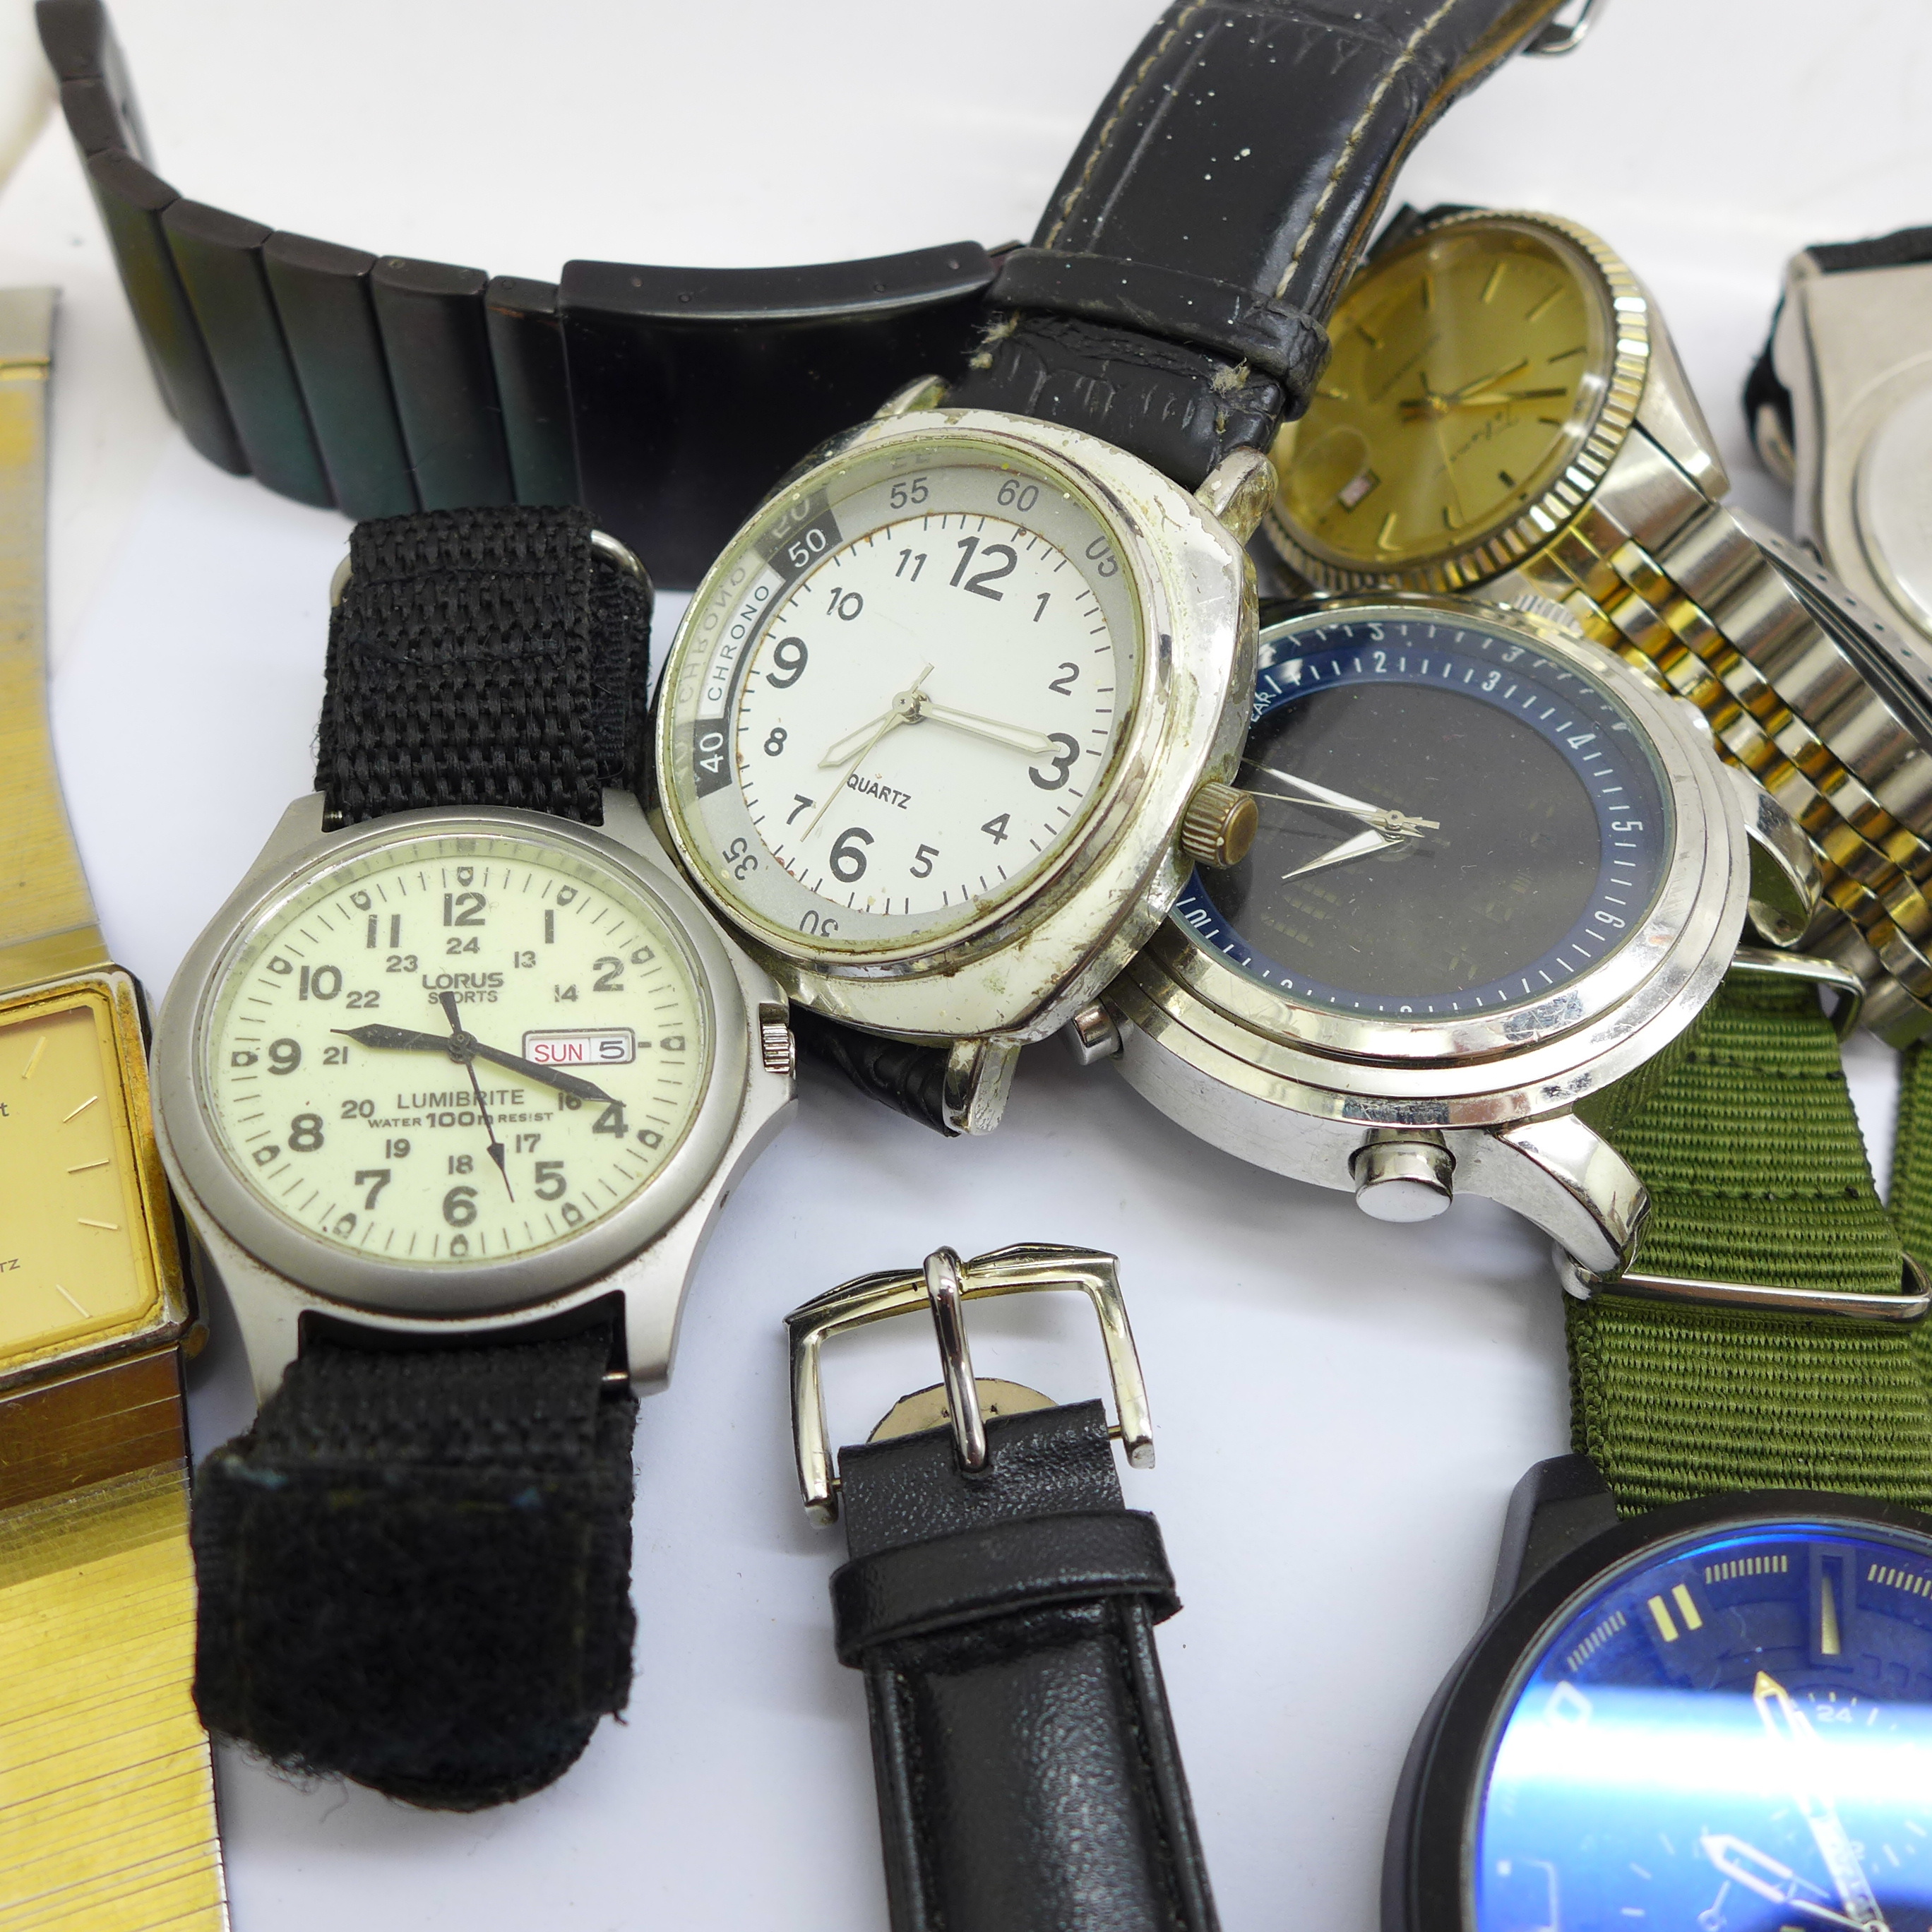 Wristwatches including Seiko and Accurist, watch glasses, etc. - Image 4 of 8